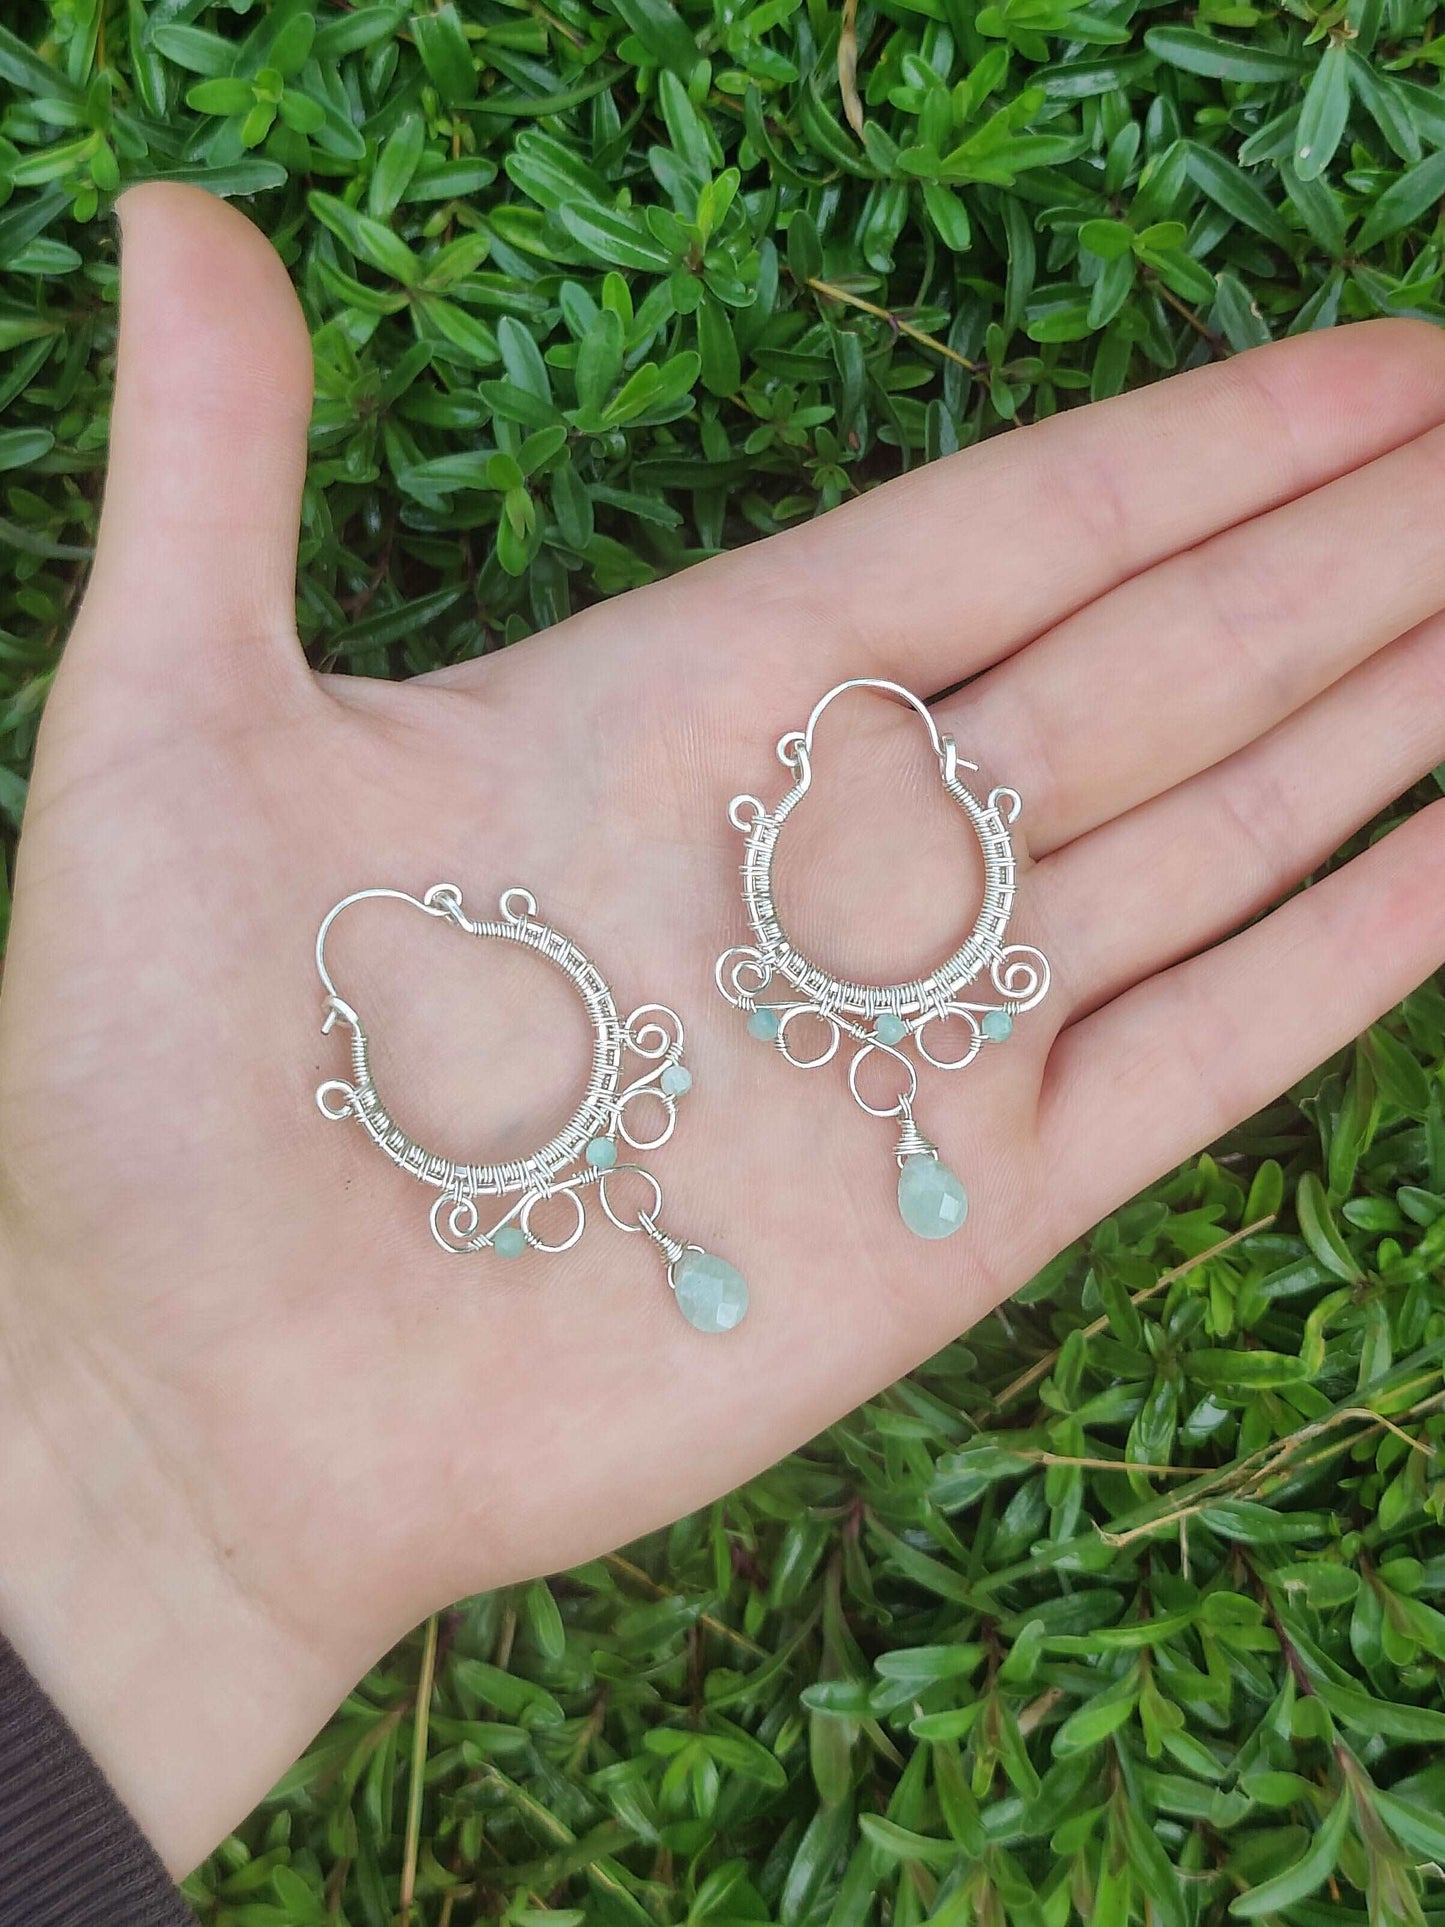 Handmade sterling silver filled hoop earrings. Made using blue amazonite crystal beads to give you that perfect boho hippie vibe.. MAde using wire wrapping and wire weaving techniques.